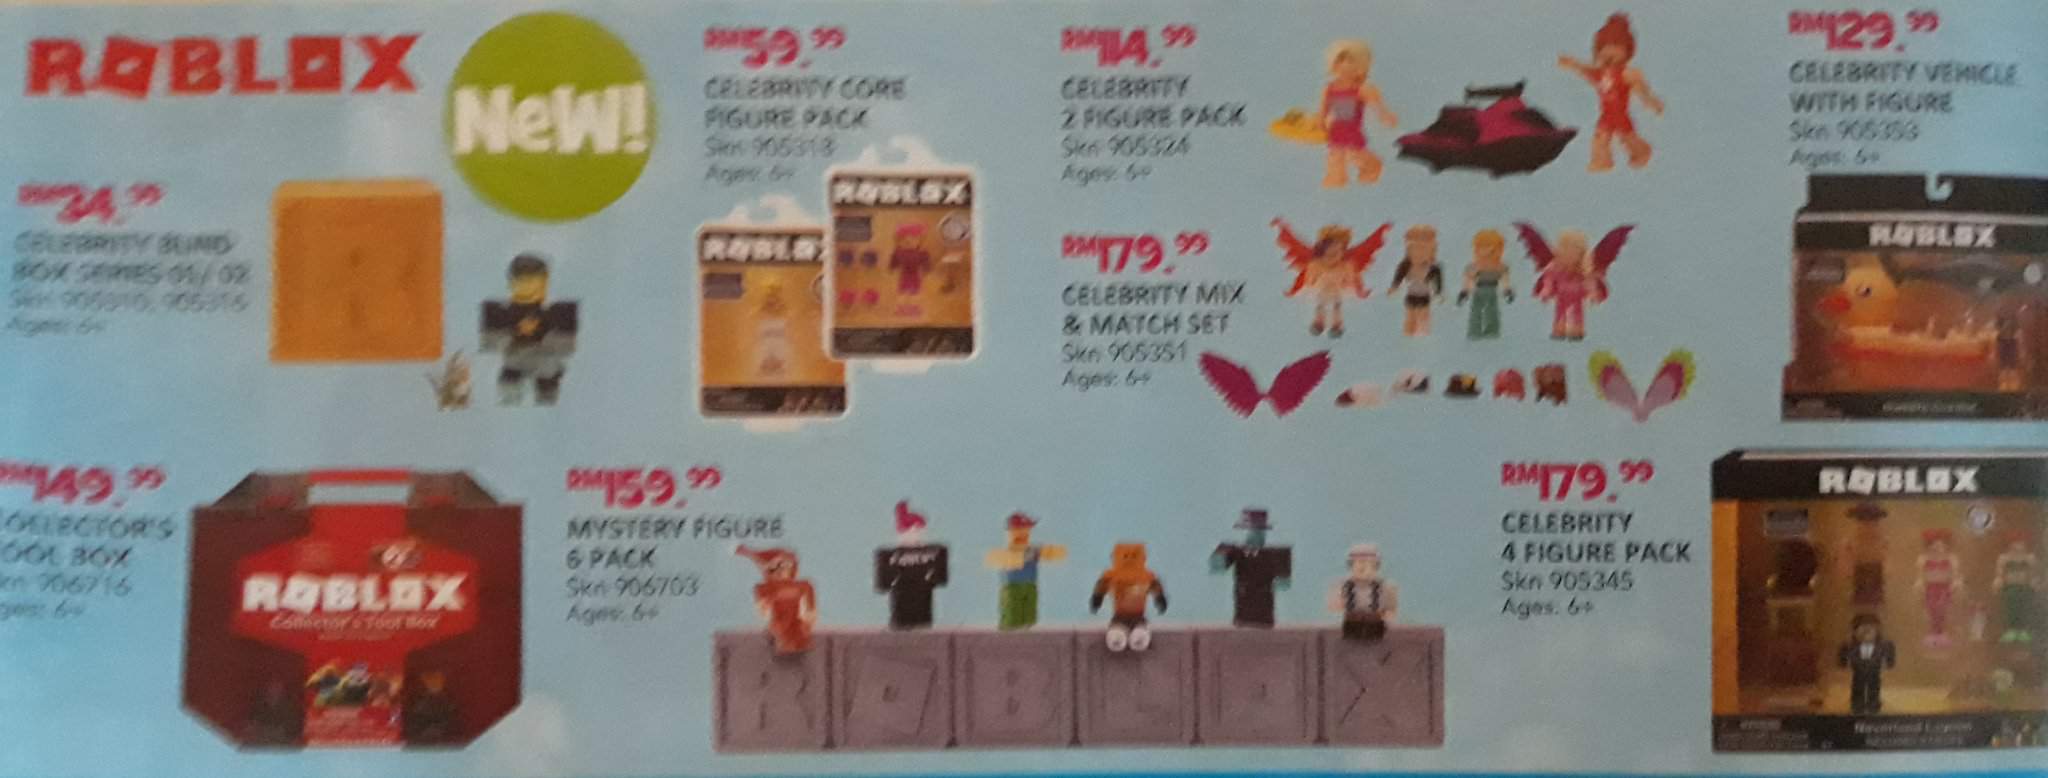 New Roblox Toys Selling In Toys R Us Price Is Below Shop